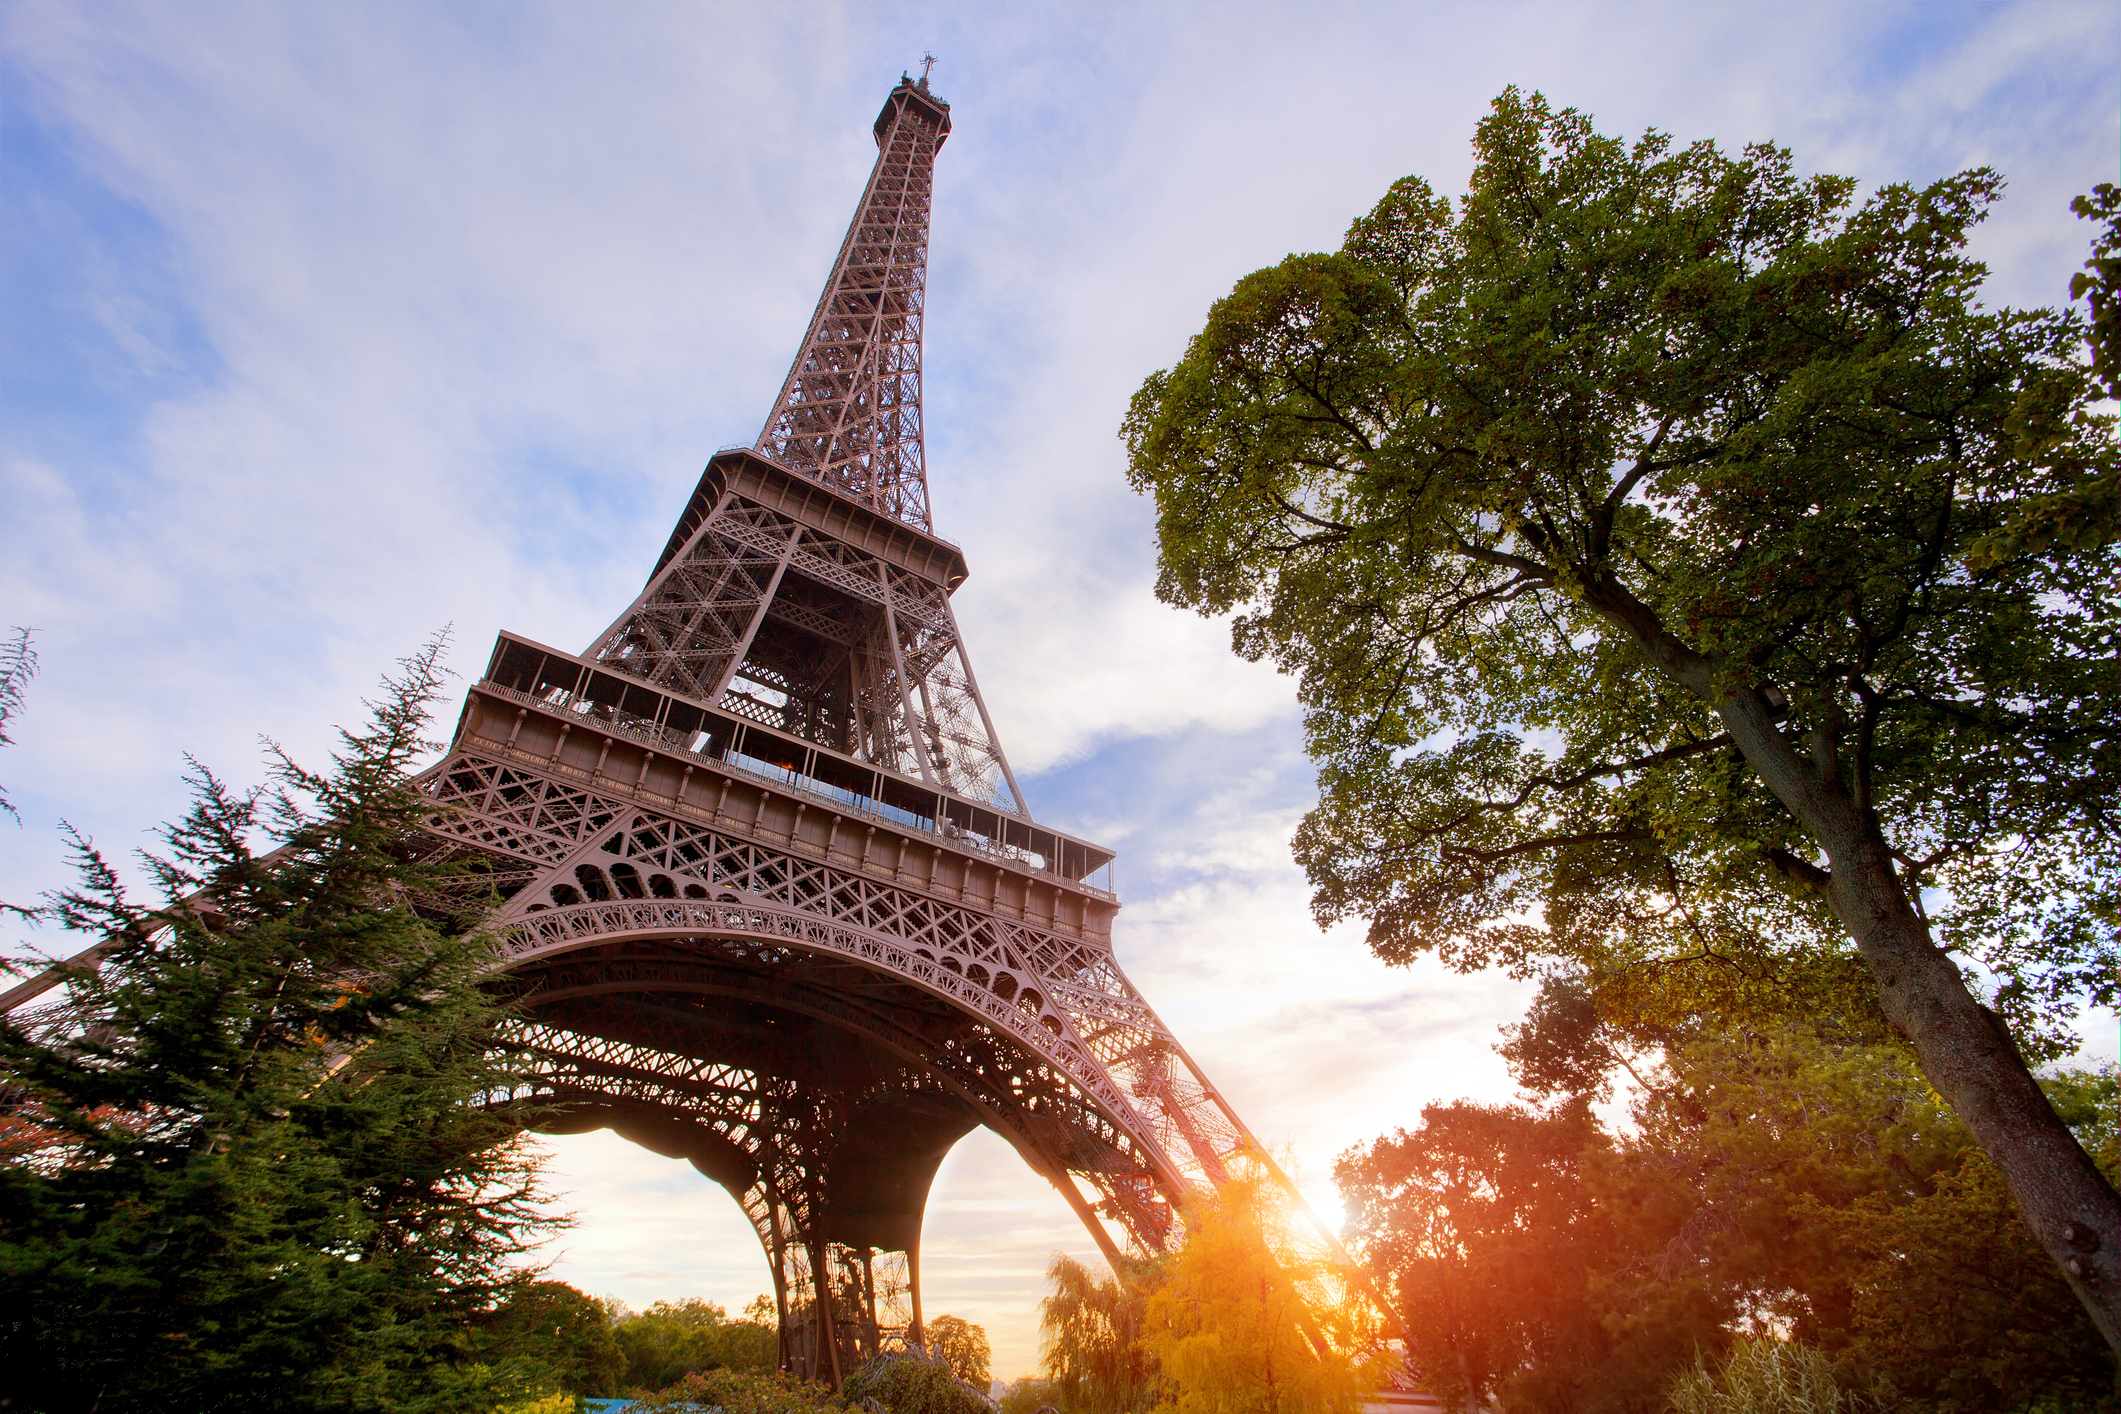 The Eiffel Tower | Source: Getty Images